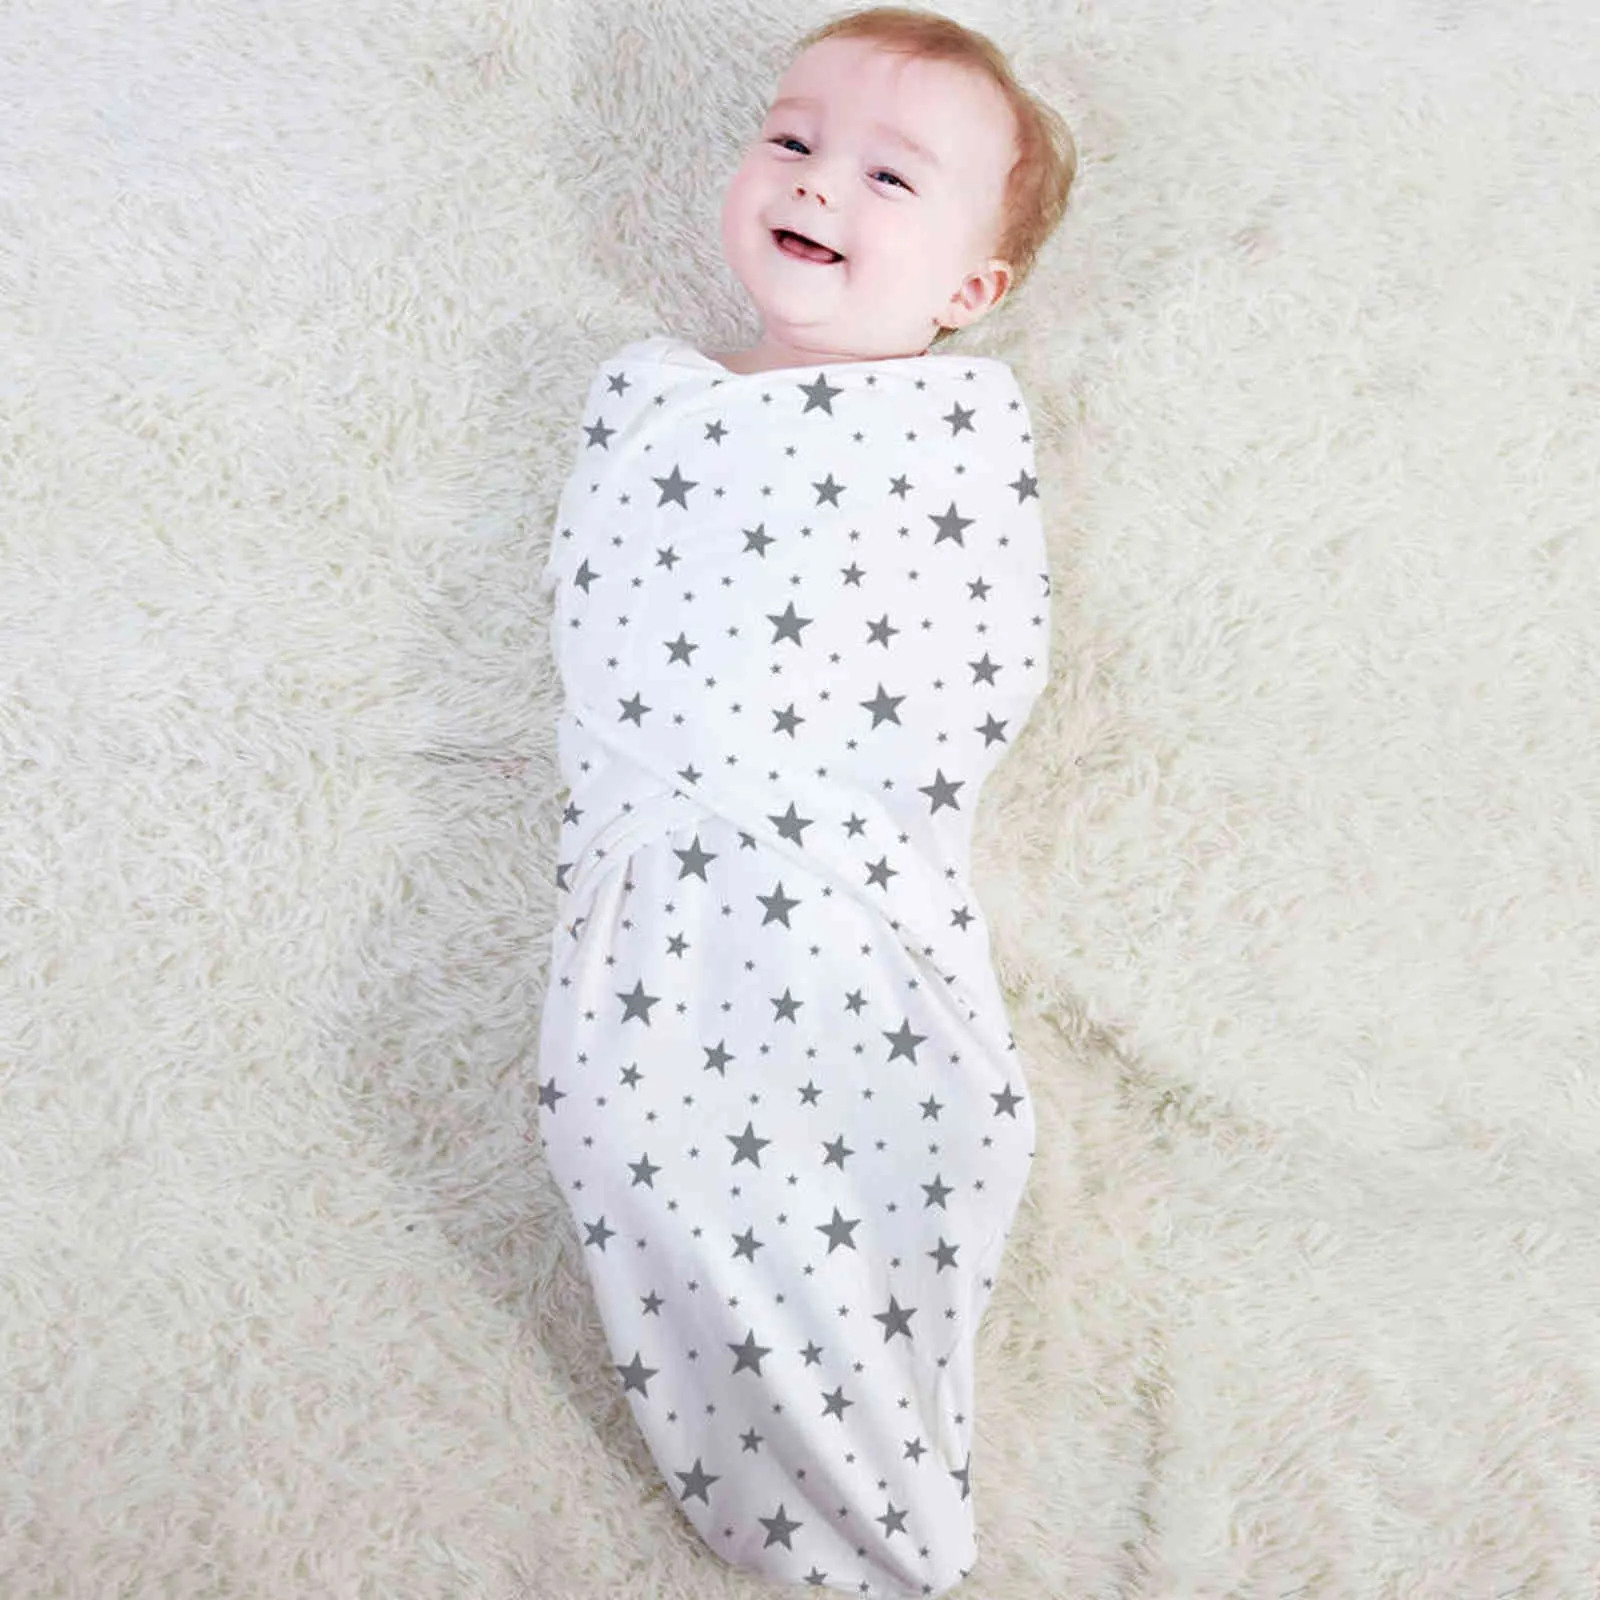 Baby Swaddle Adjustable Infant wrap- 0-3 Months -Pack of 2 - Any